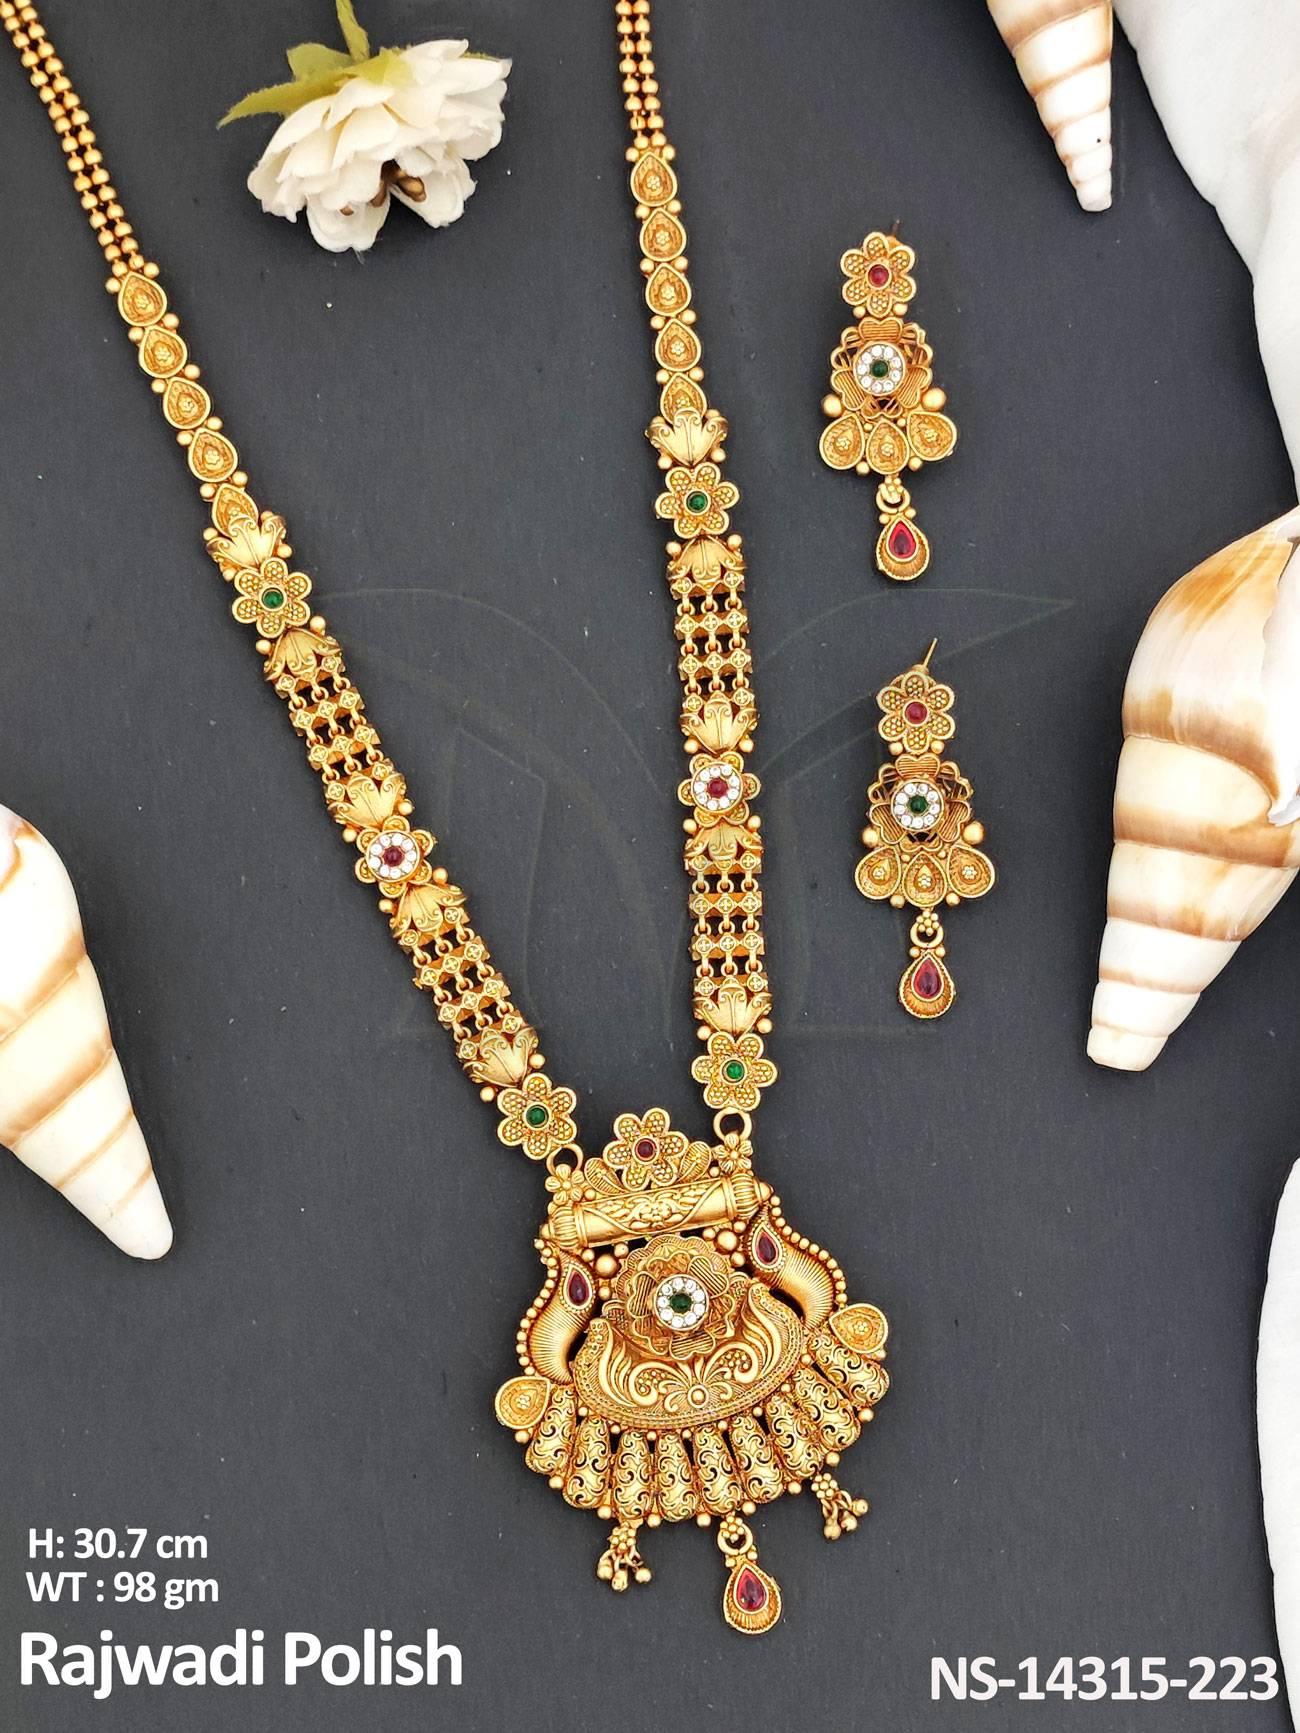 This exquisite Antique Jewellery Designer Rajwadi Polish Party Wear Long Necklace Set is crafted with expert precision and adorned with intricate designs.